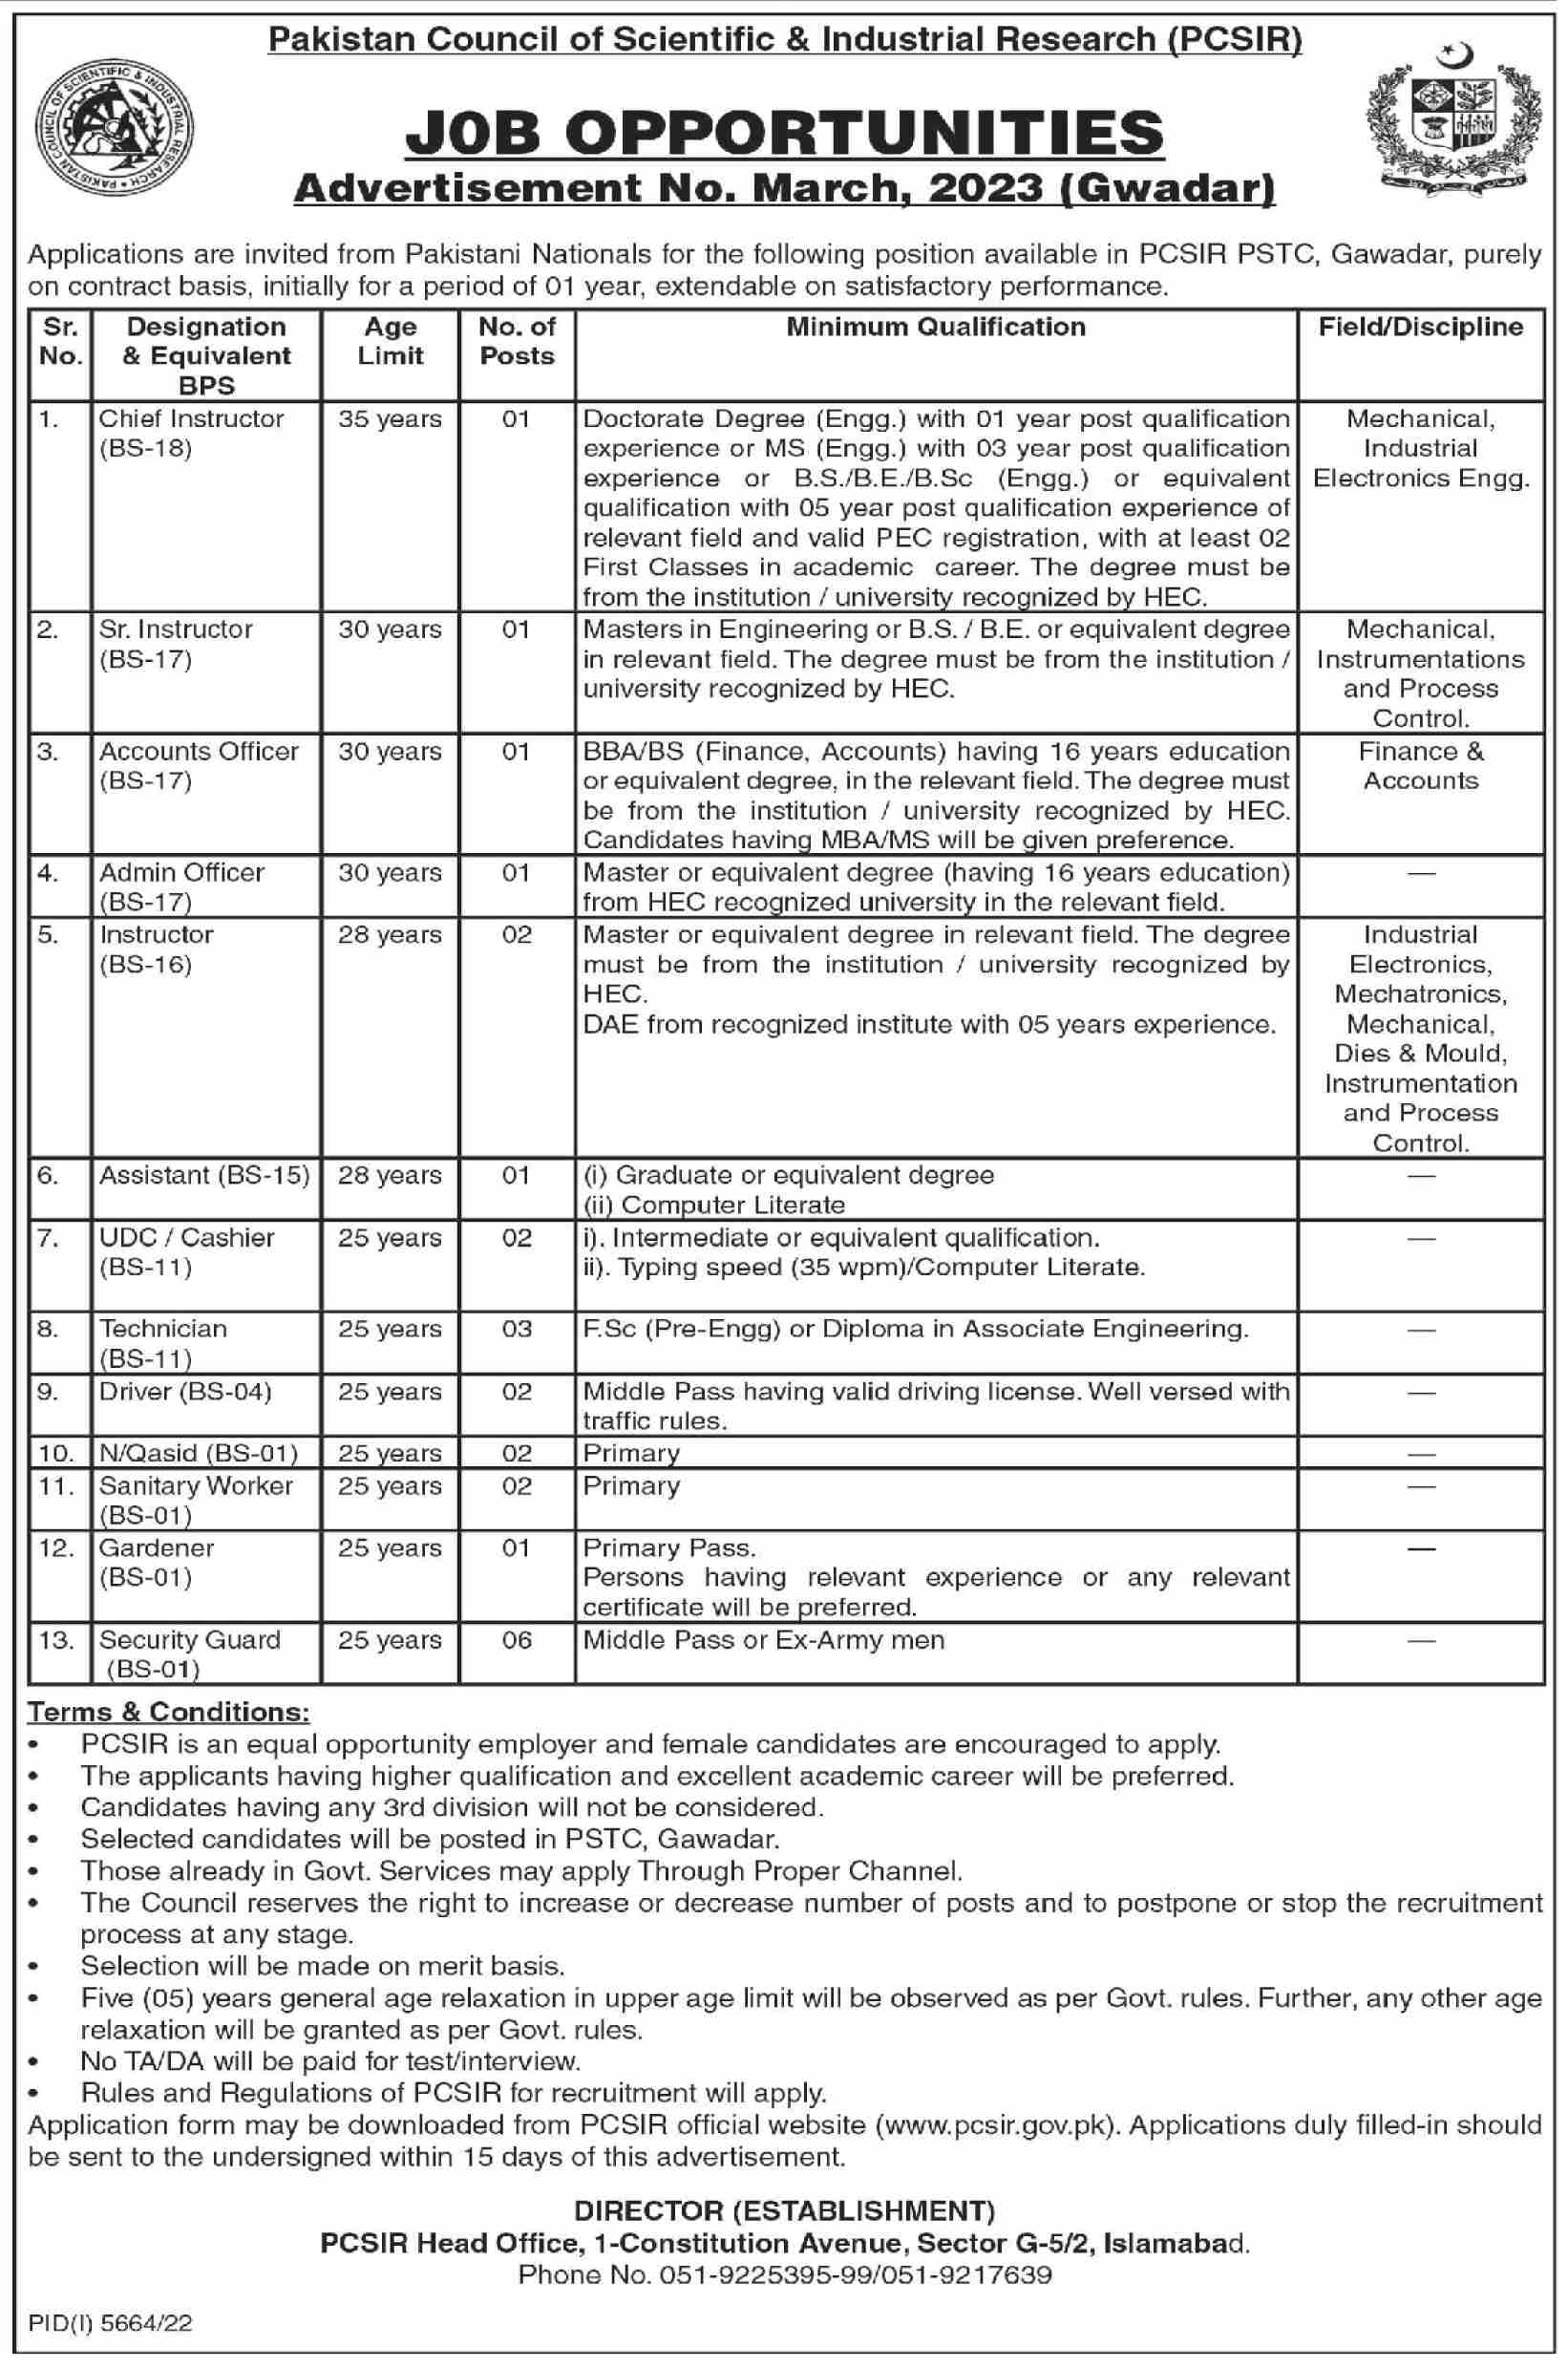 Career Opportunities in PCSIR